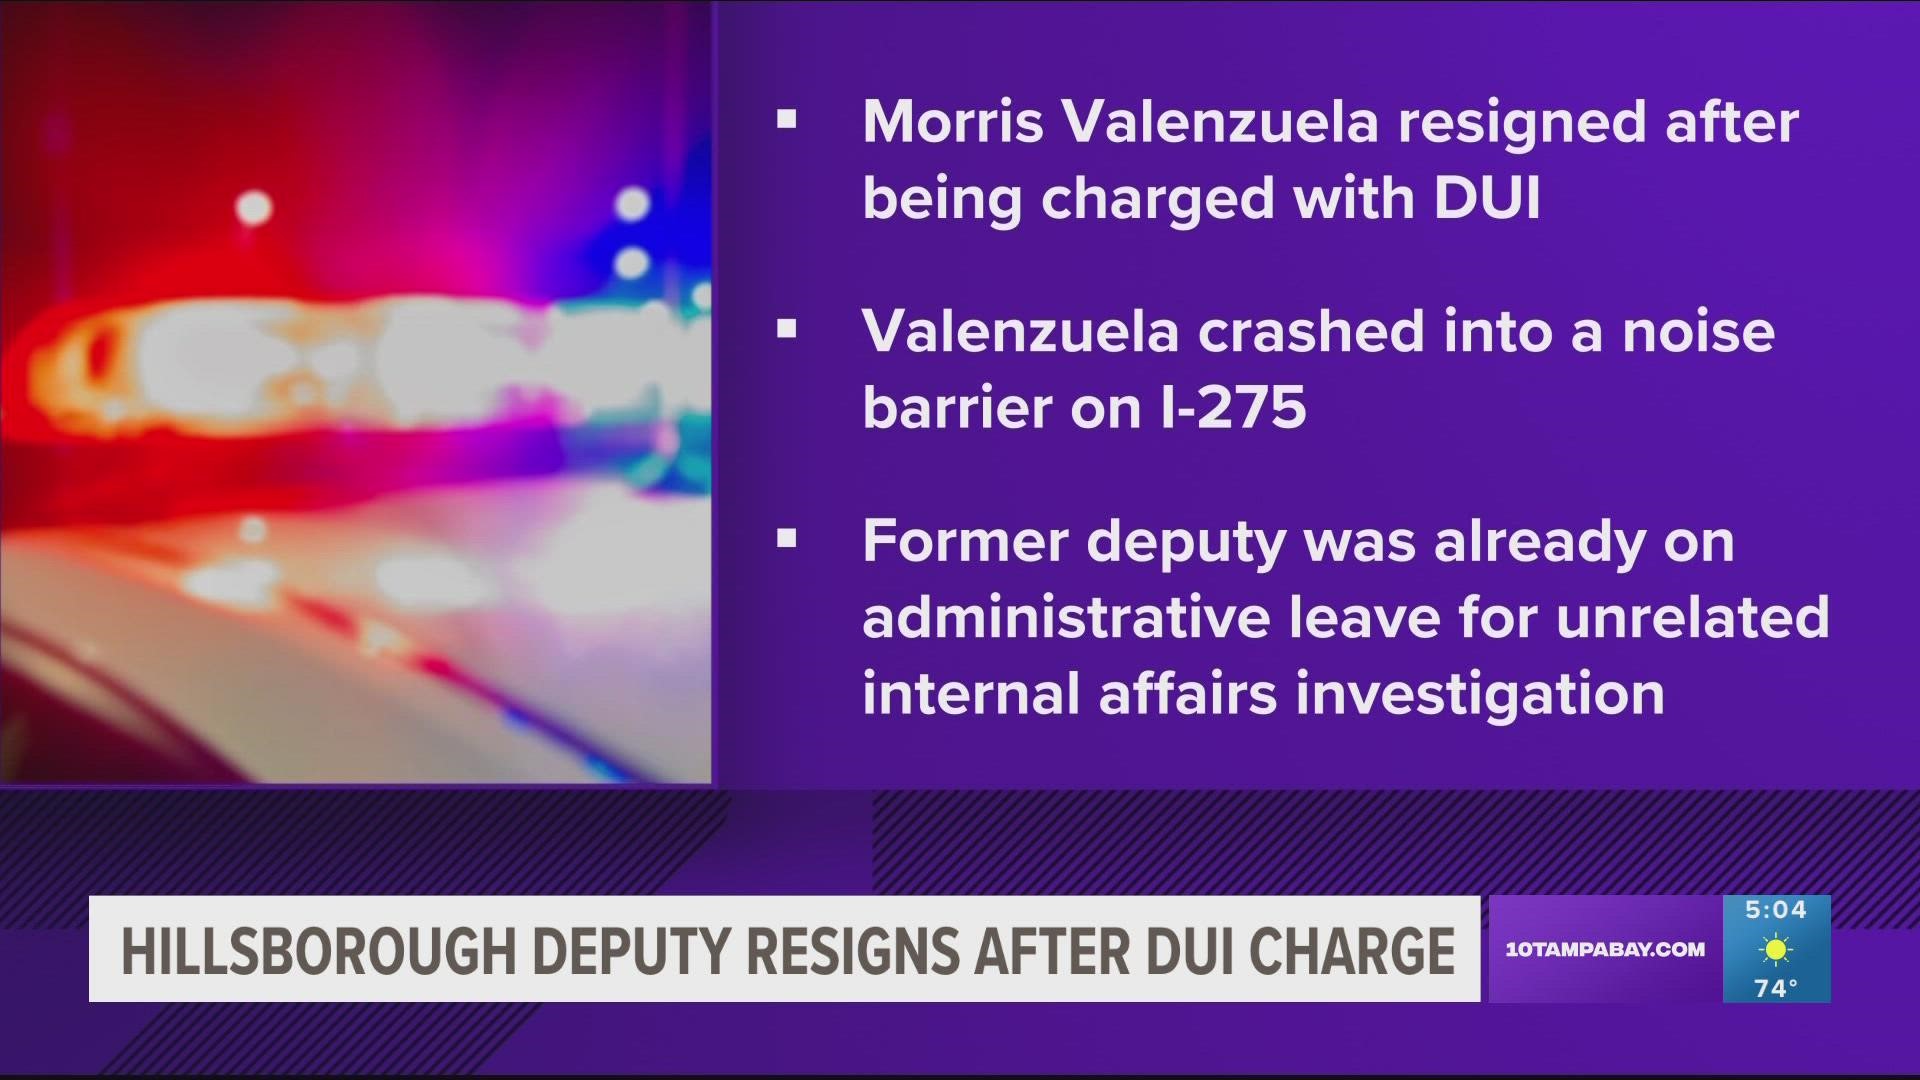 Deputy Morris Valenzuela was on administrative leave without pay amid an unrelated internal investigation at the time of the DUI arrest, the sheriff's office said.